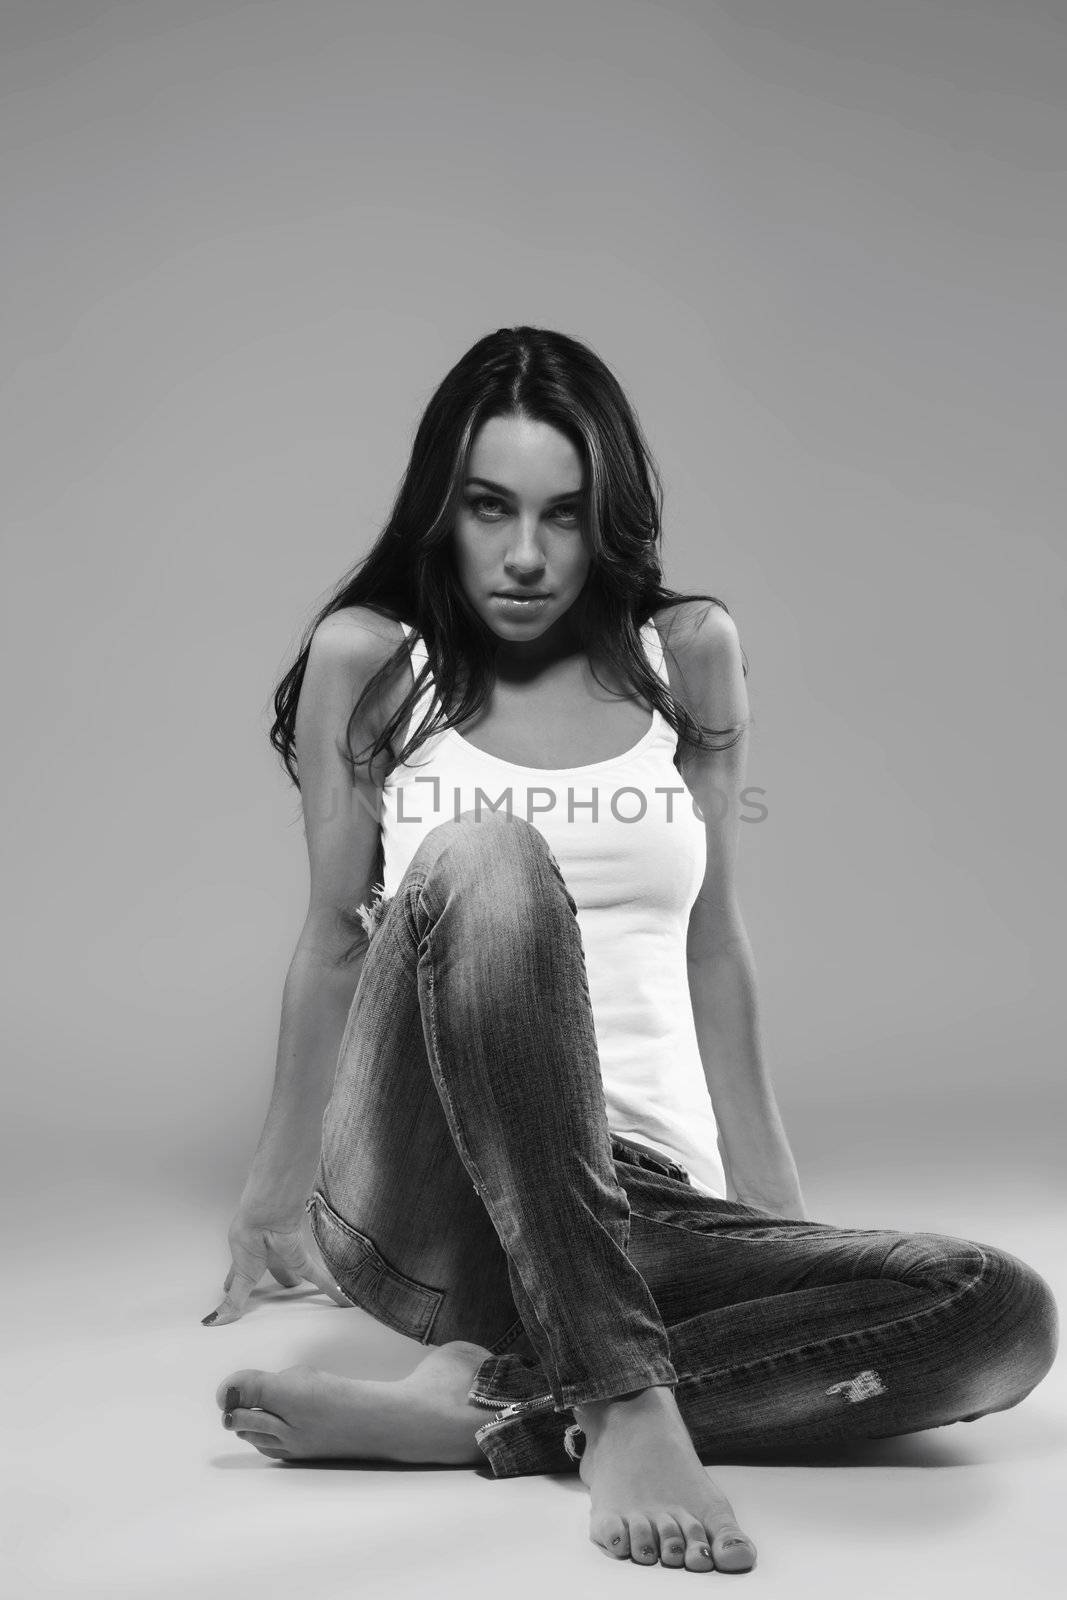 gorgeous woman wearing blue jeans sitting on the floor in black and white